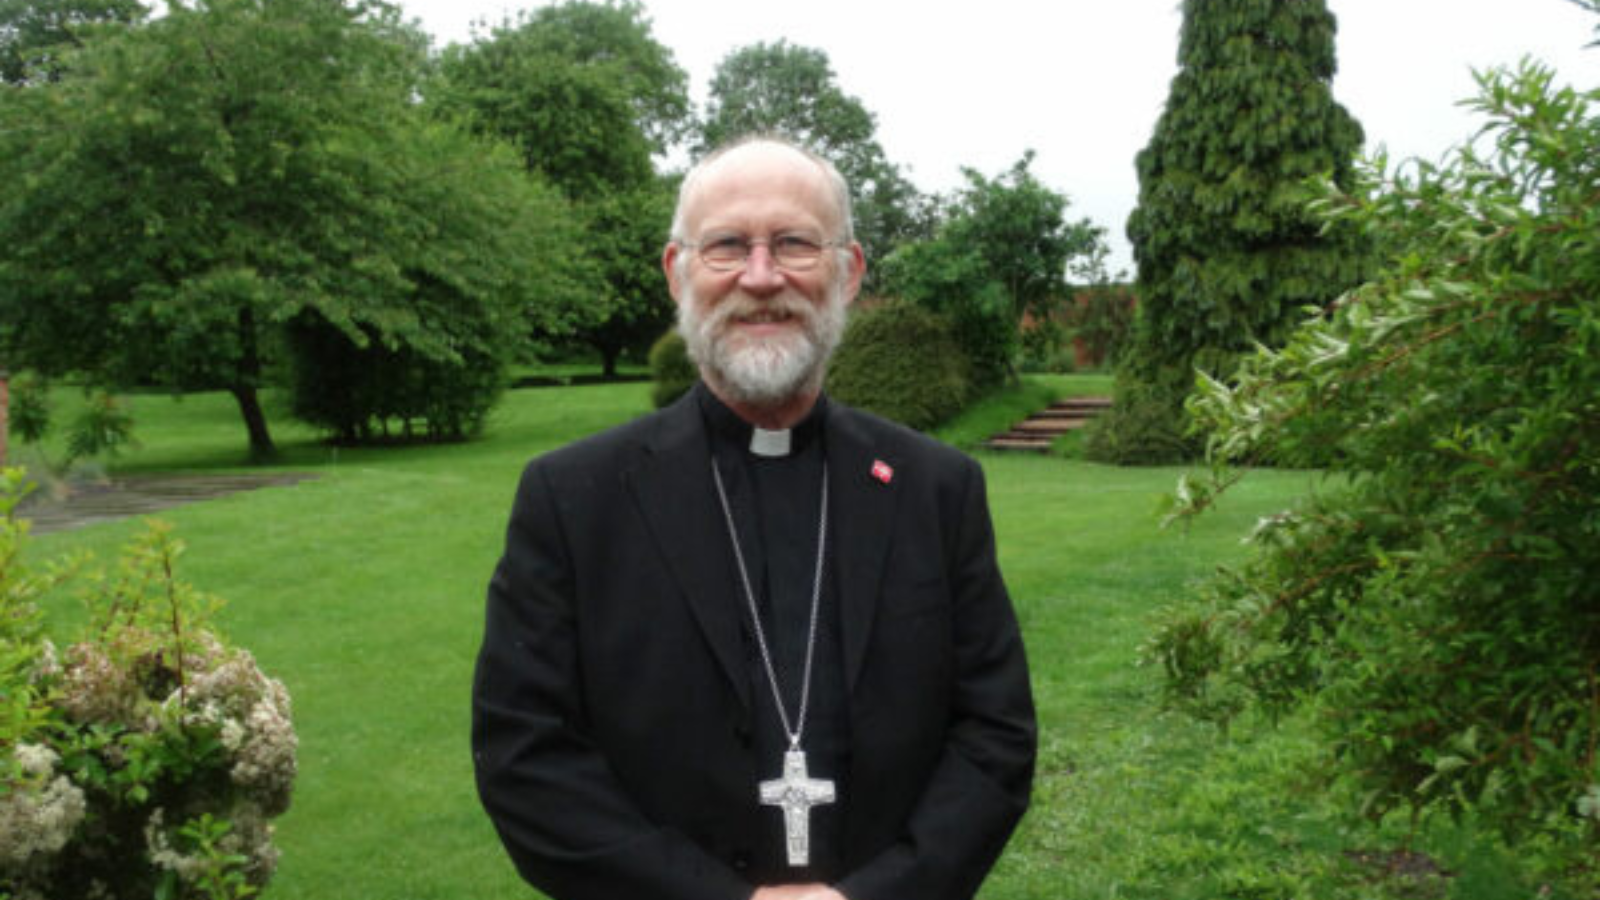 A reflection from Bishop Paul